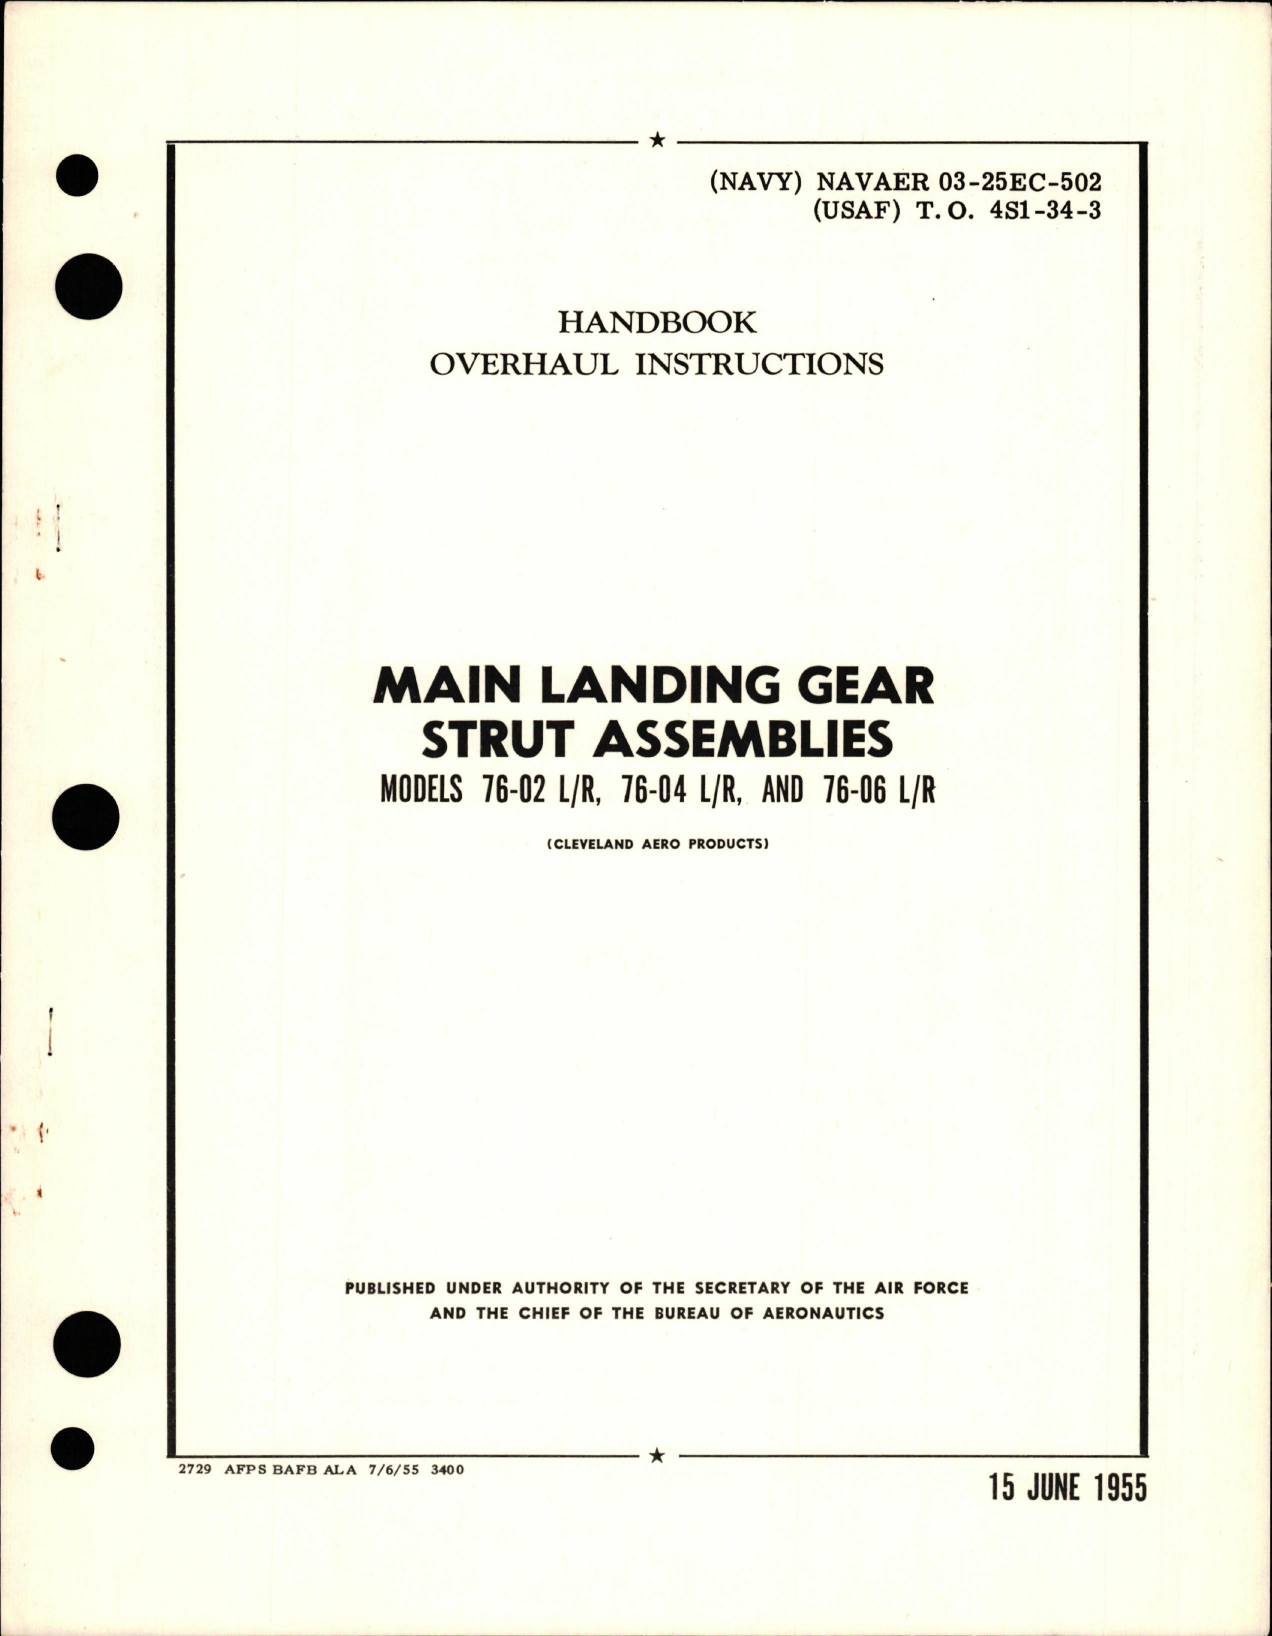 Sample page 1 from AirCorps Library document: Overhaul Instructions for Main Landing Gear Strut Assembly - Models 76-02, 76-04, and 76-06